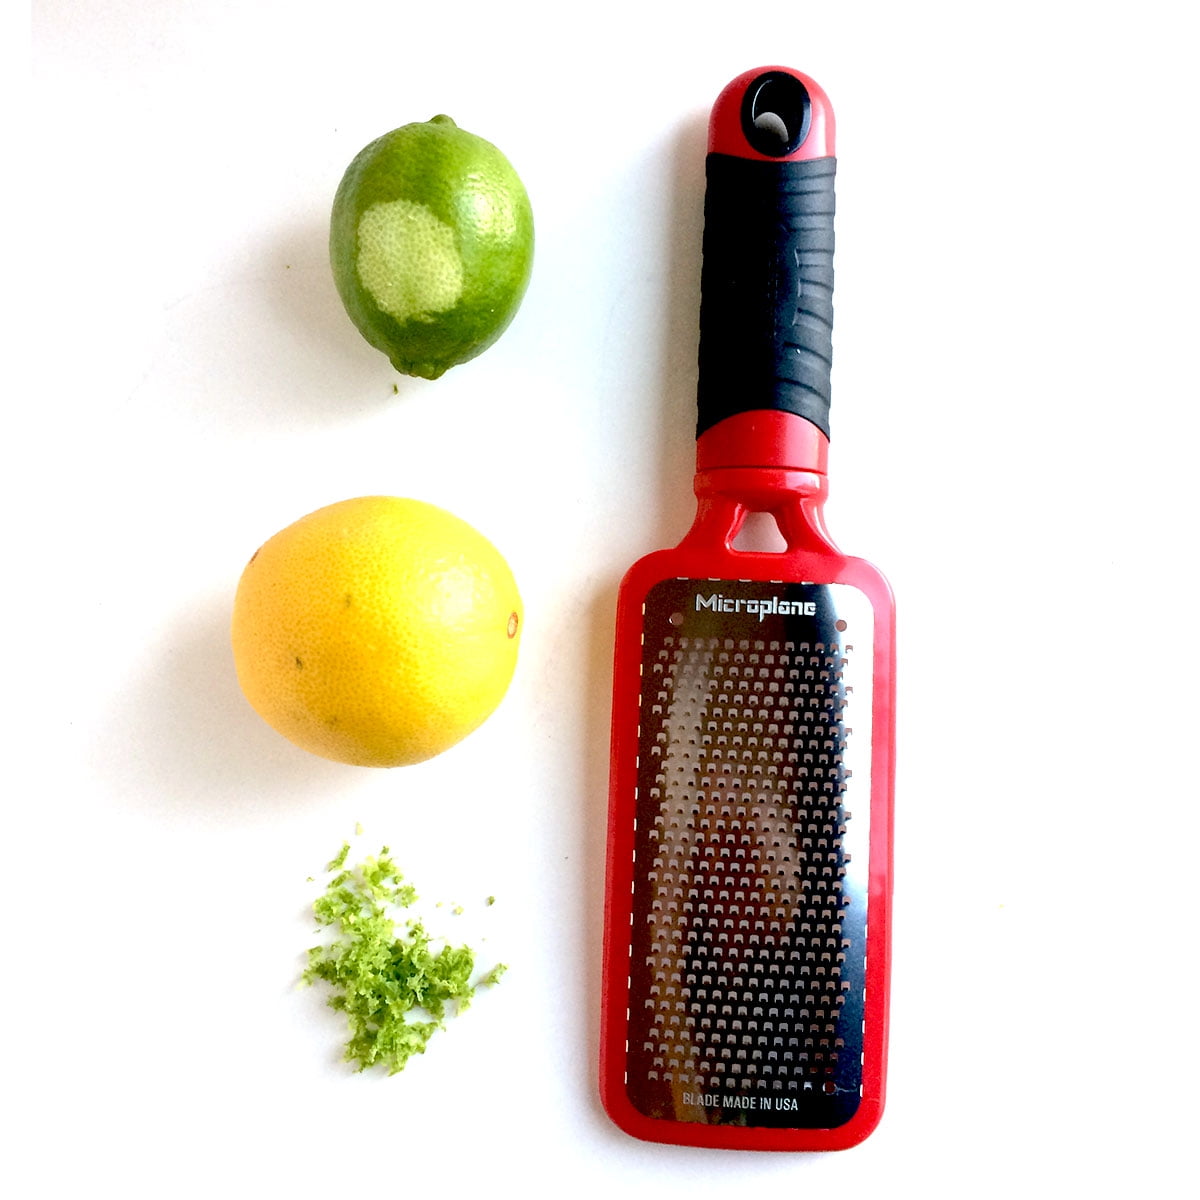 The Microplane is a Terrible Cheese Grater